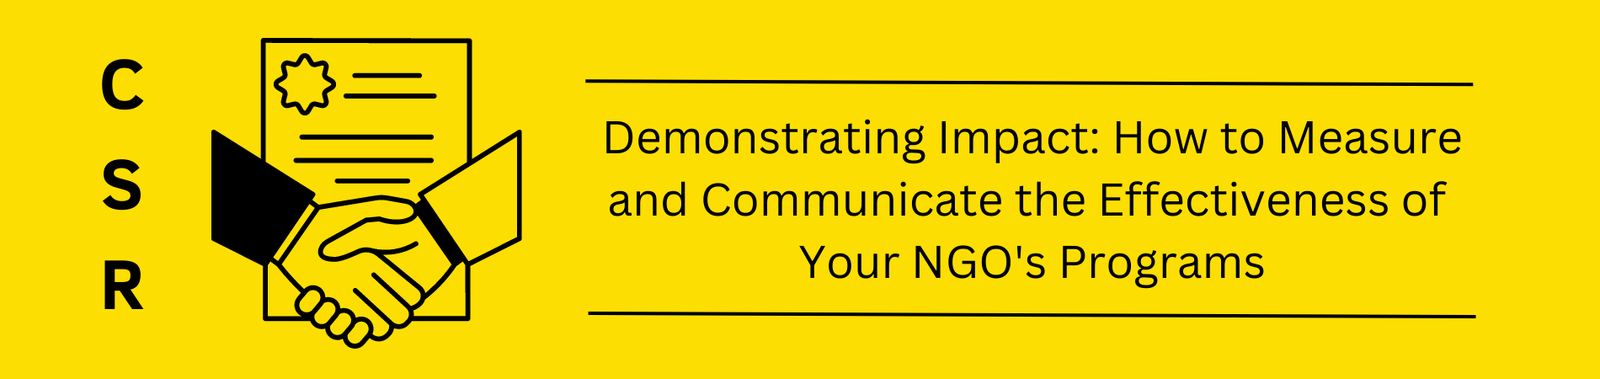 Demonstrating Impact: How to Measure and Communicate the Effectiveness of Your NGO’s Programs